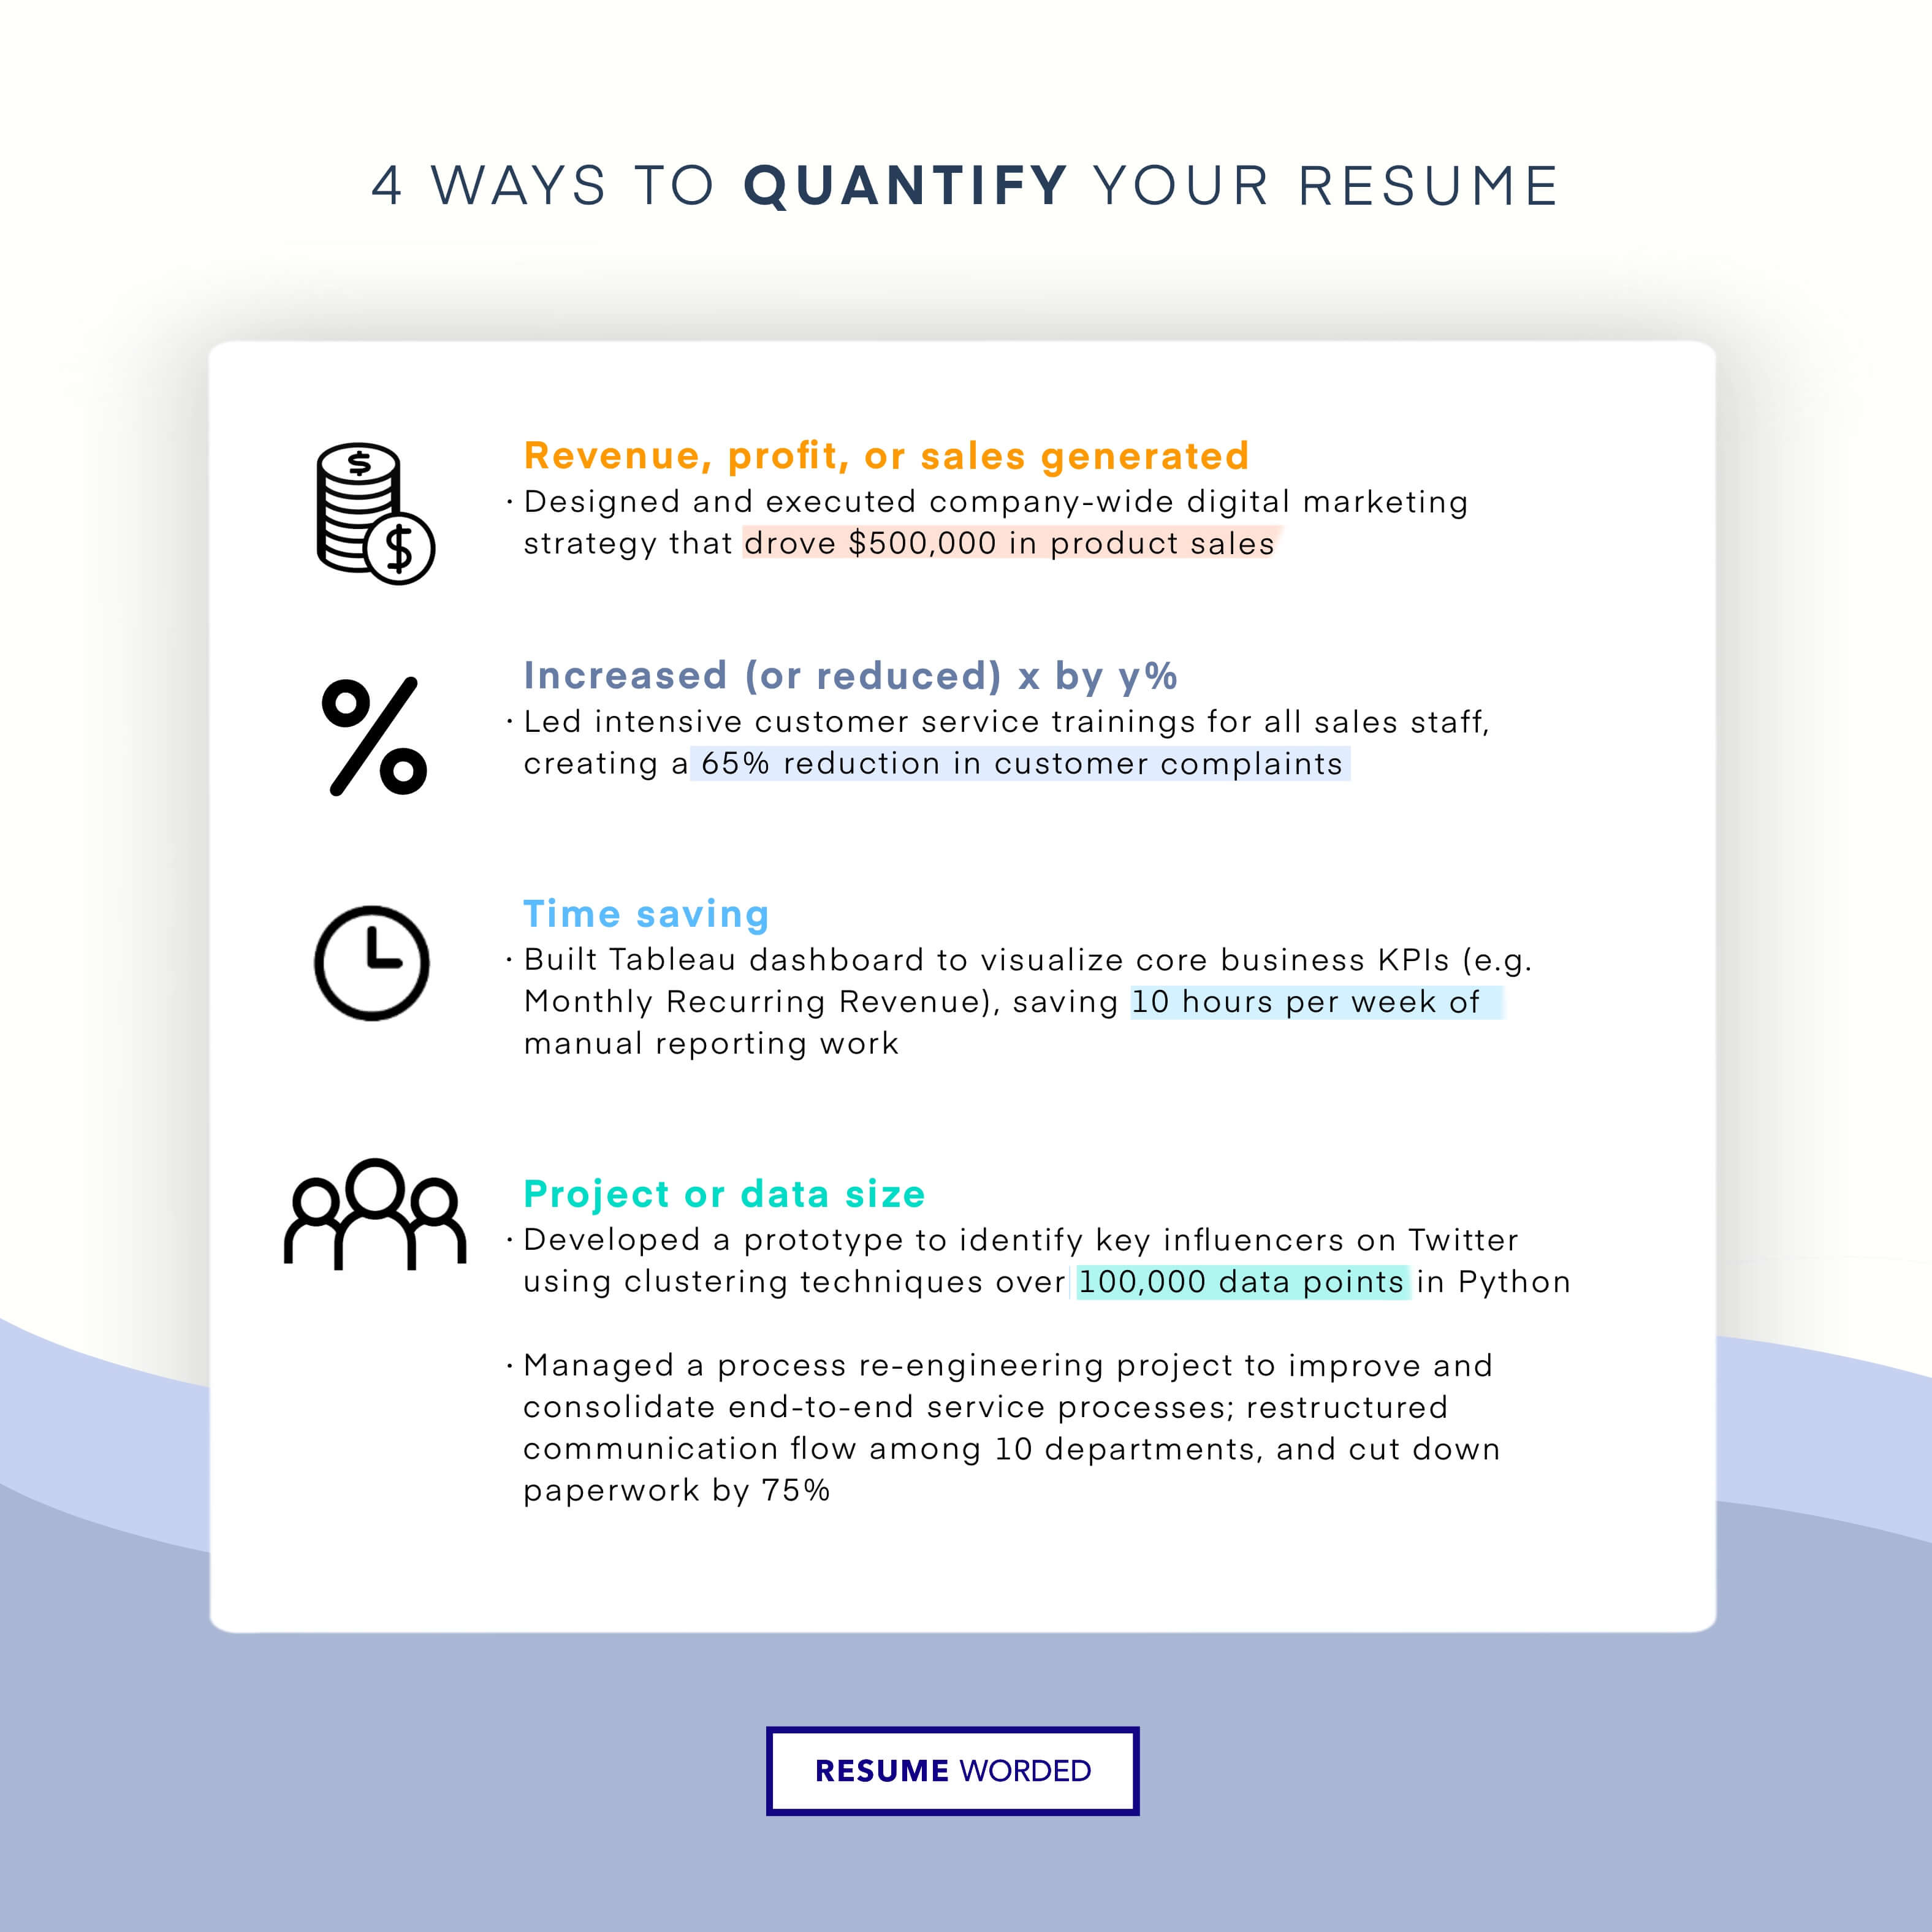 Quantify your output and success as an agency manager. - Advertising Agency Manager Resume